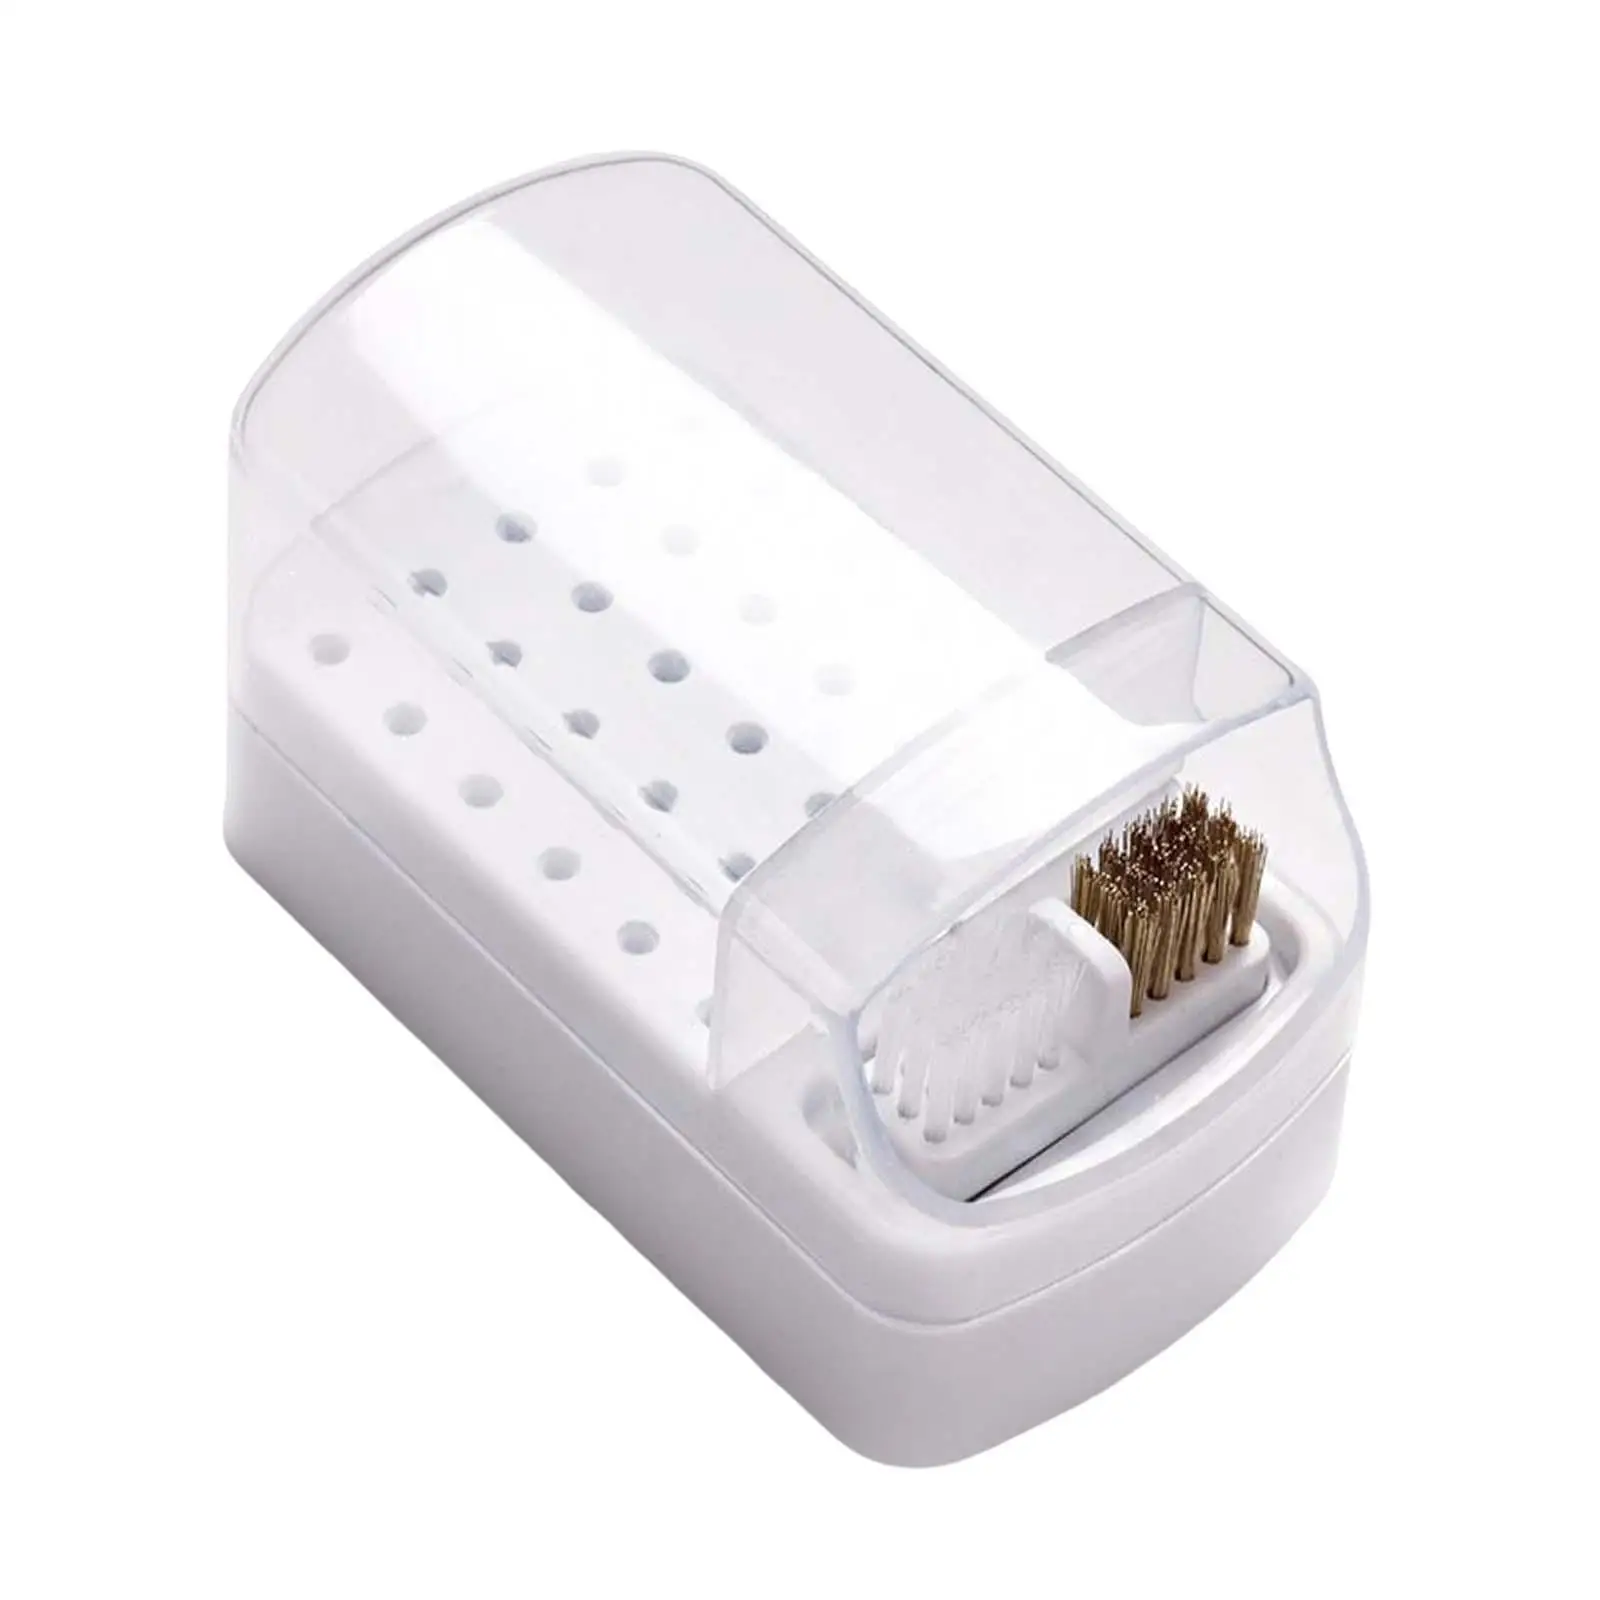 30 Holes Nail Drill Bit Holder Home DIY with Cleaning Brass Wire and Soft Brushes Waterproof Dustproof Salon Polishing bits  box